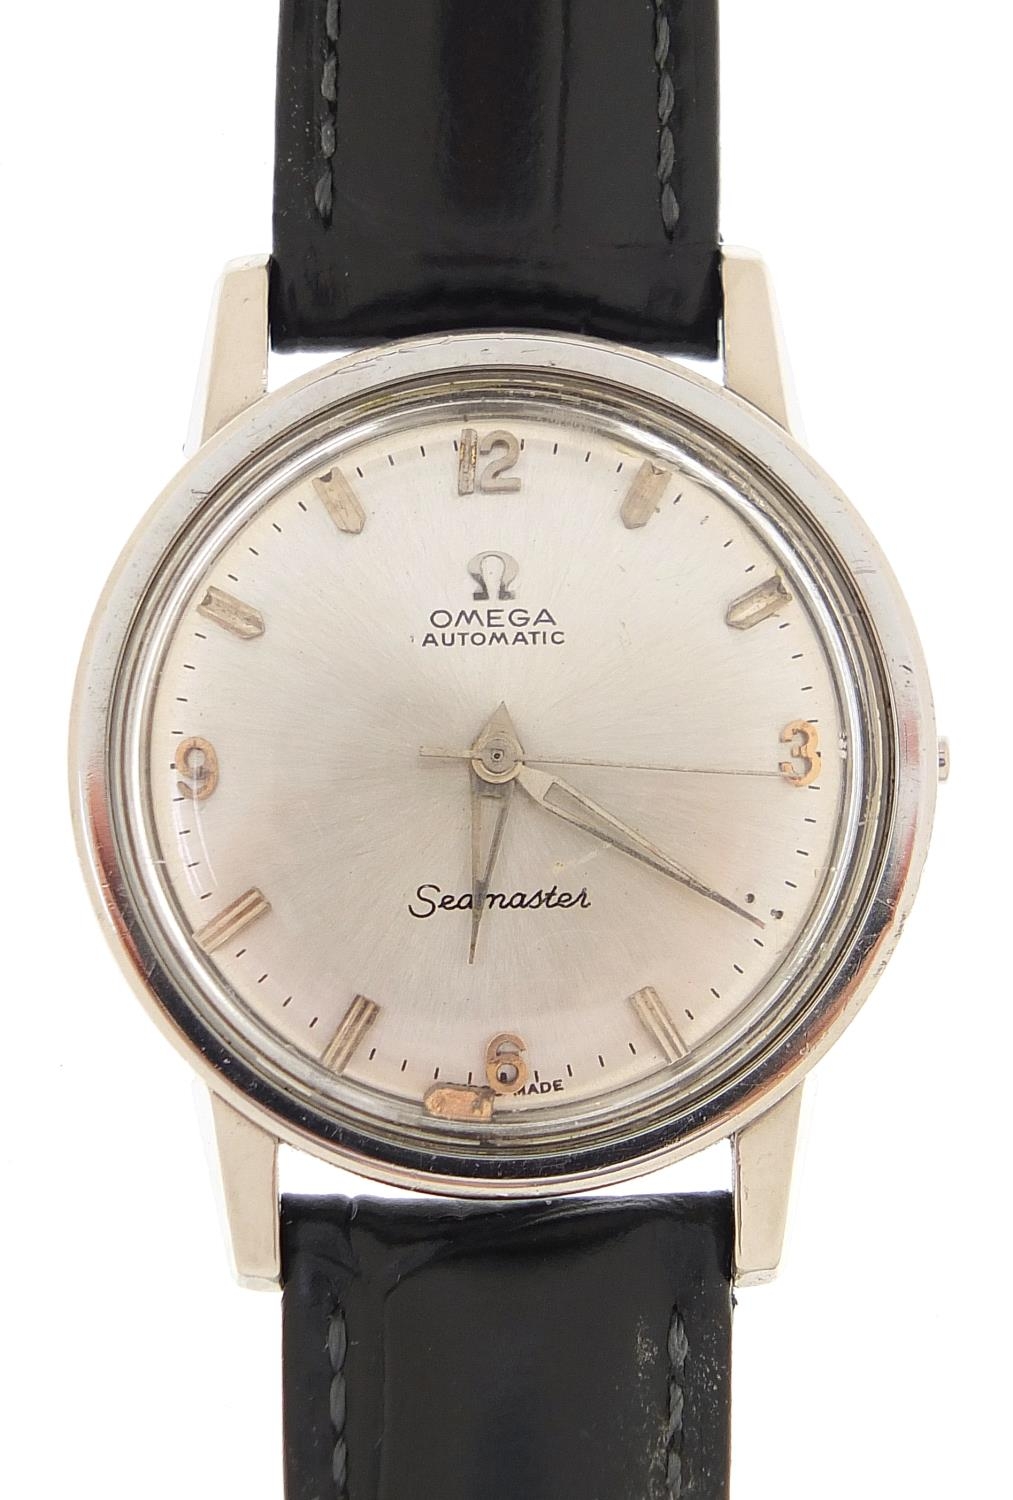 Omega, vintage gentlemen's Omega Seamaster automatic wristwatch movement and case, the movement